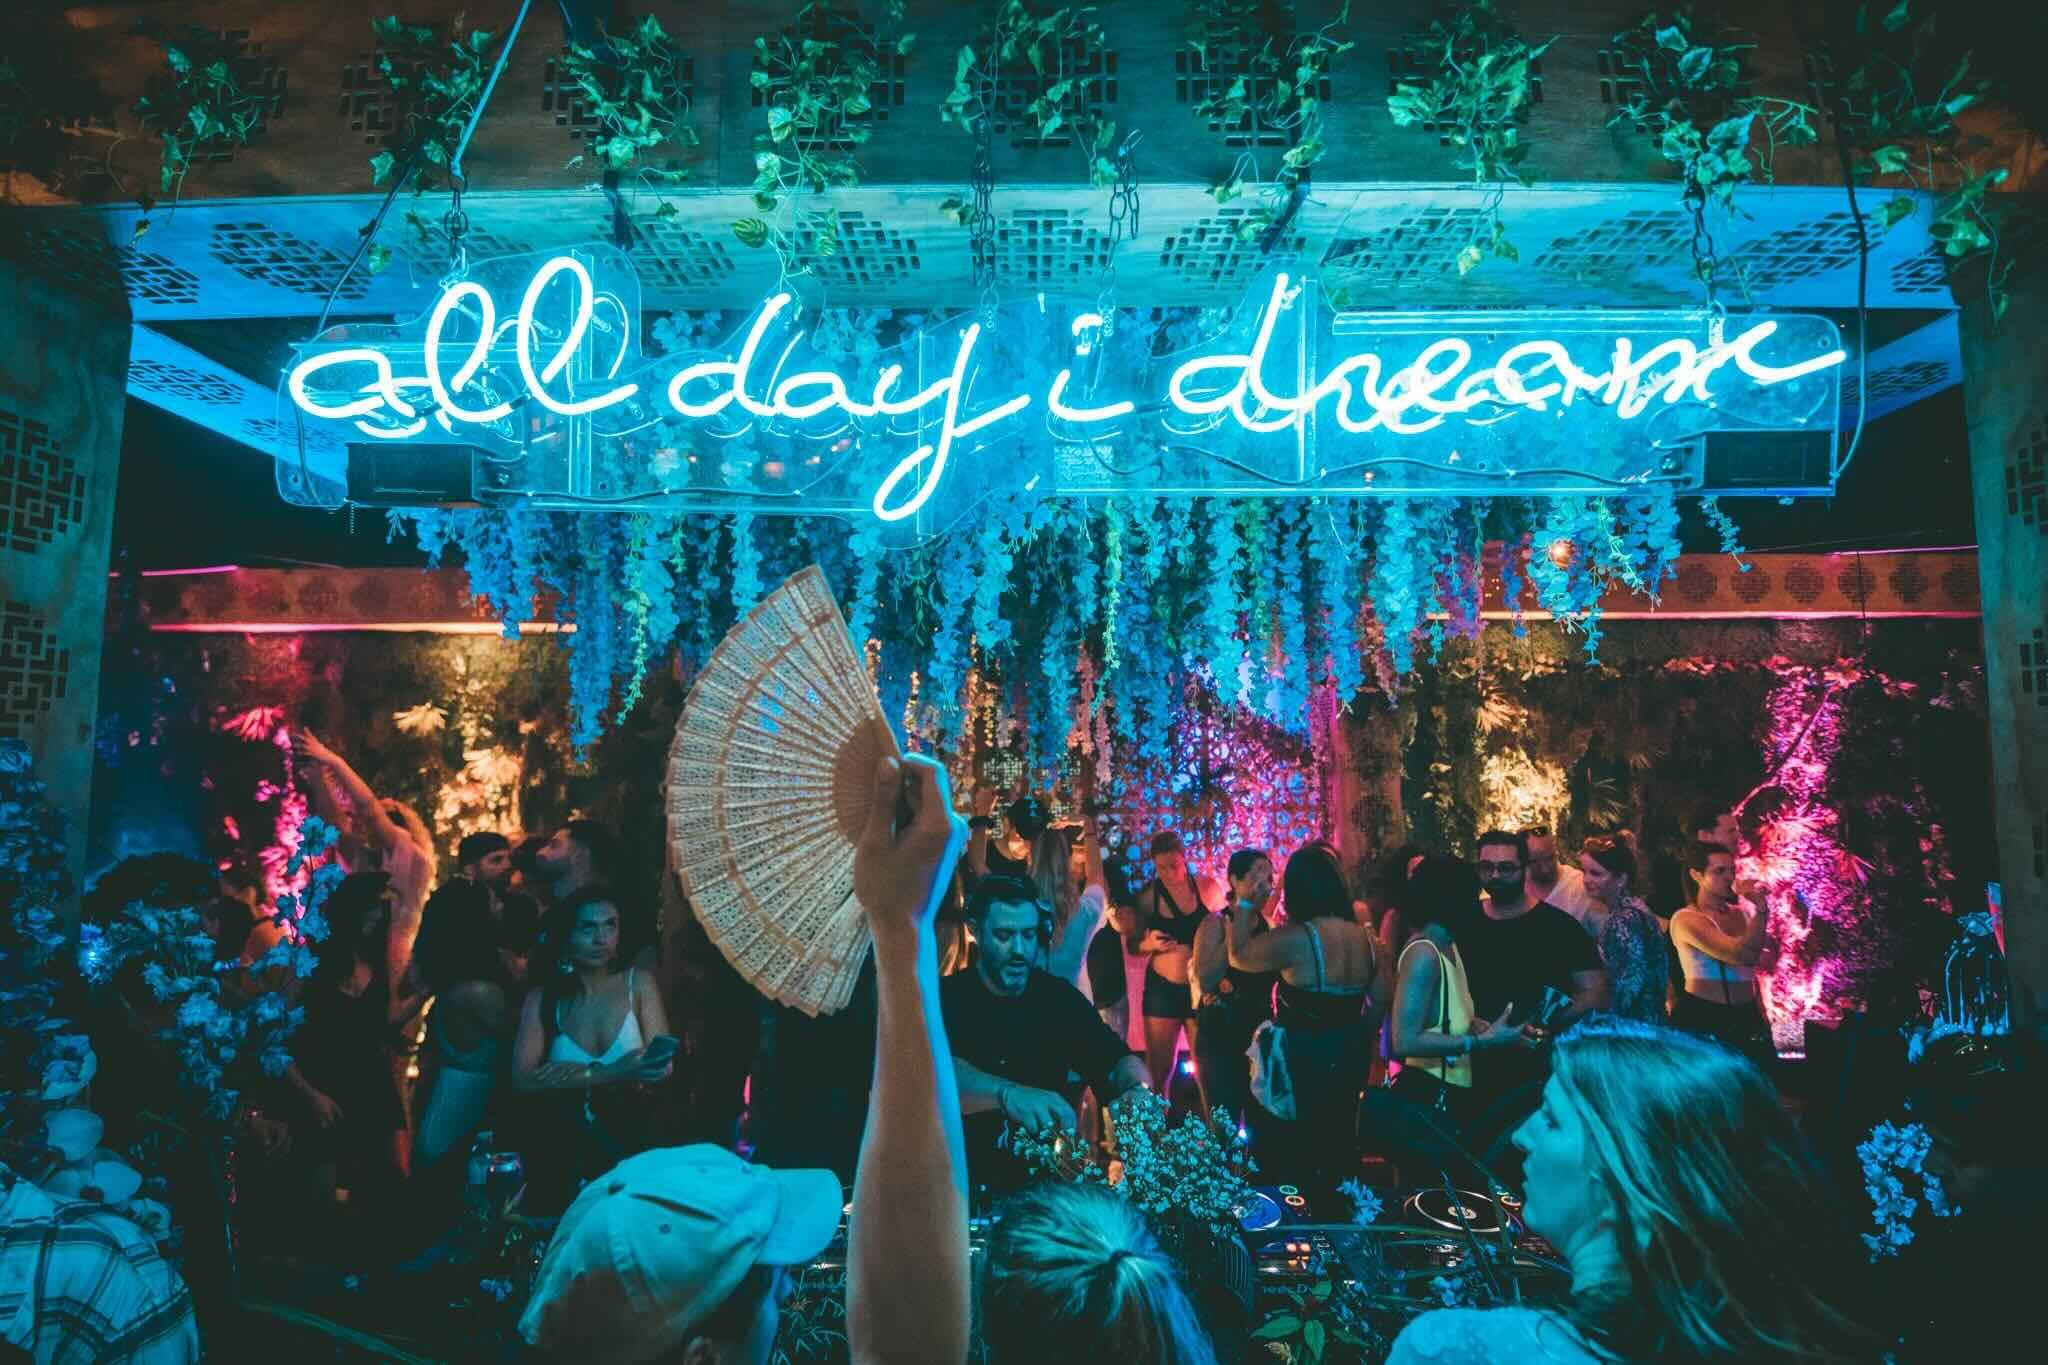 All Day I Dream music festival is coming to Saudi Arabia